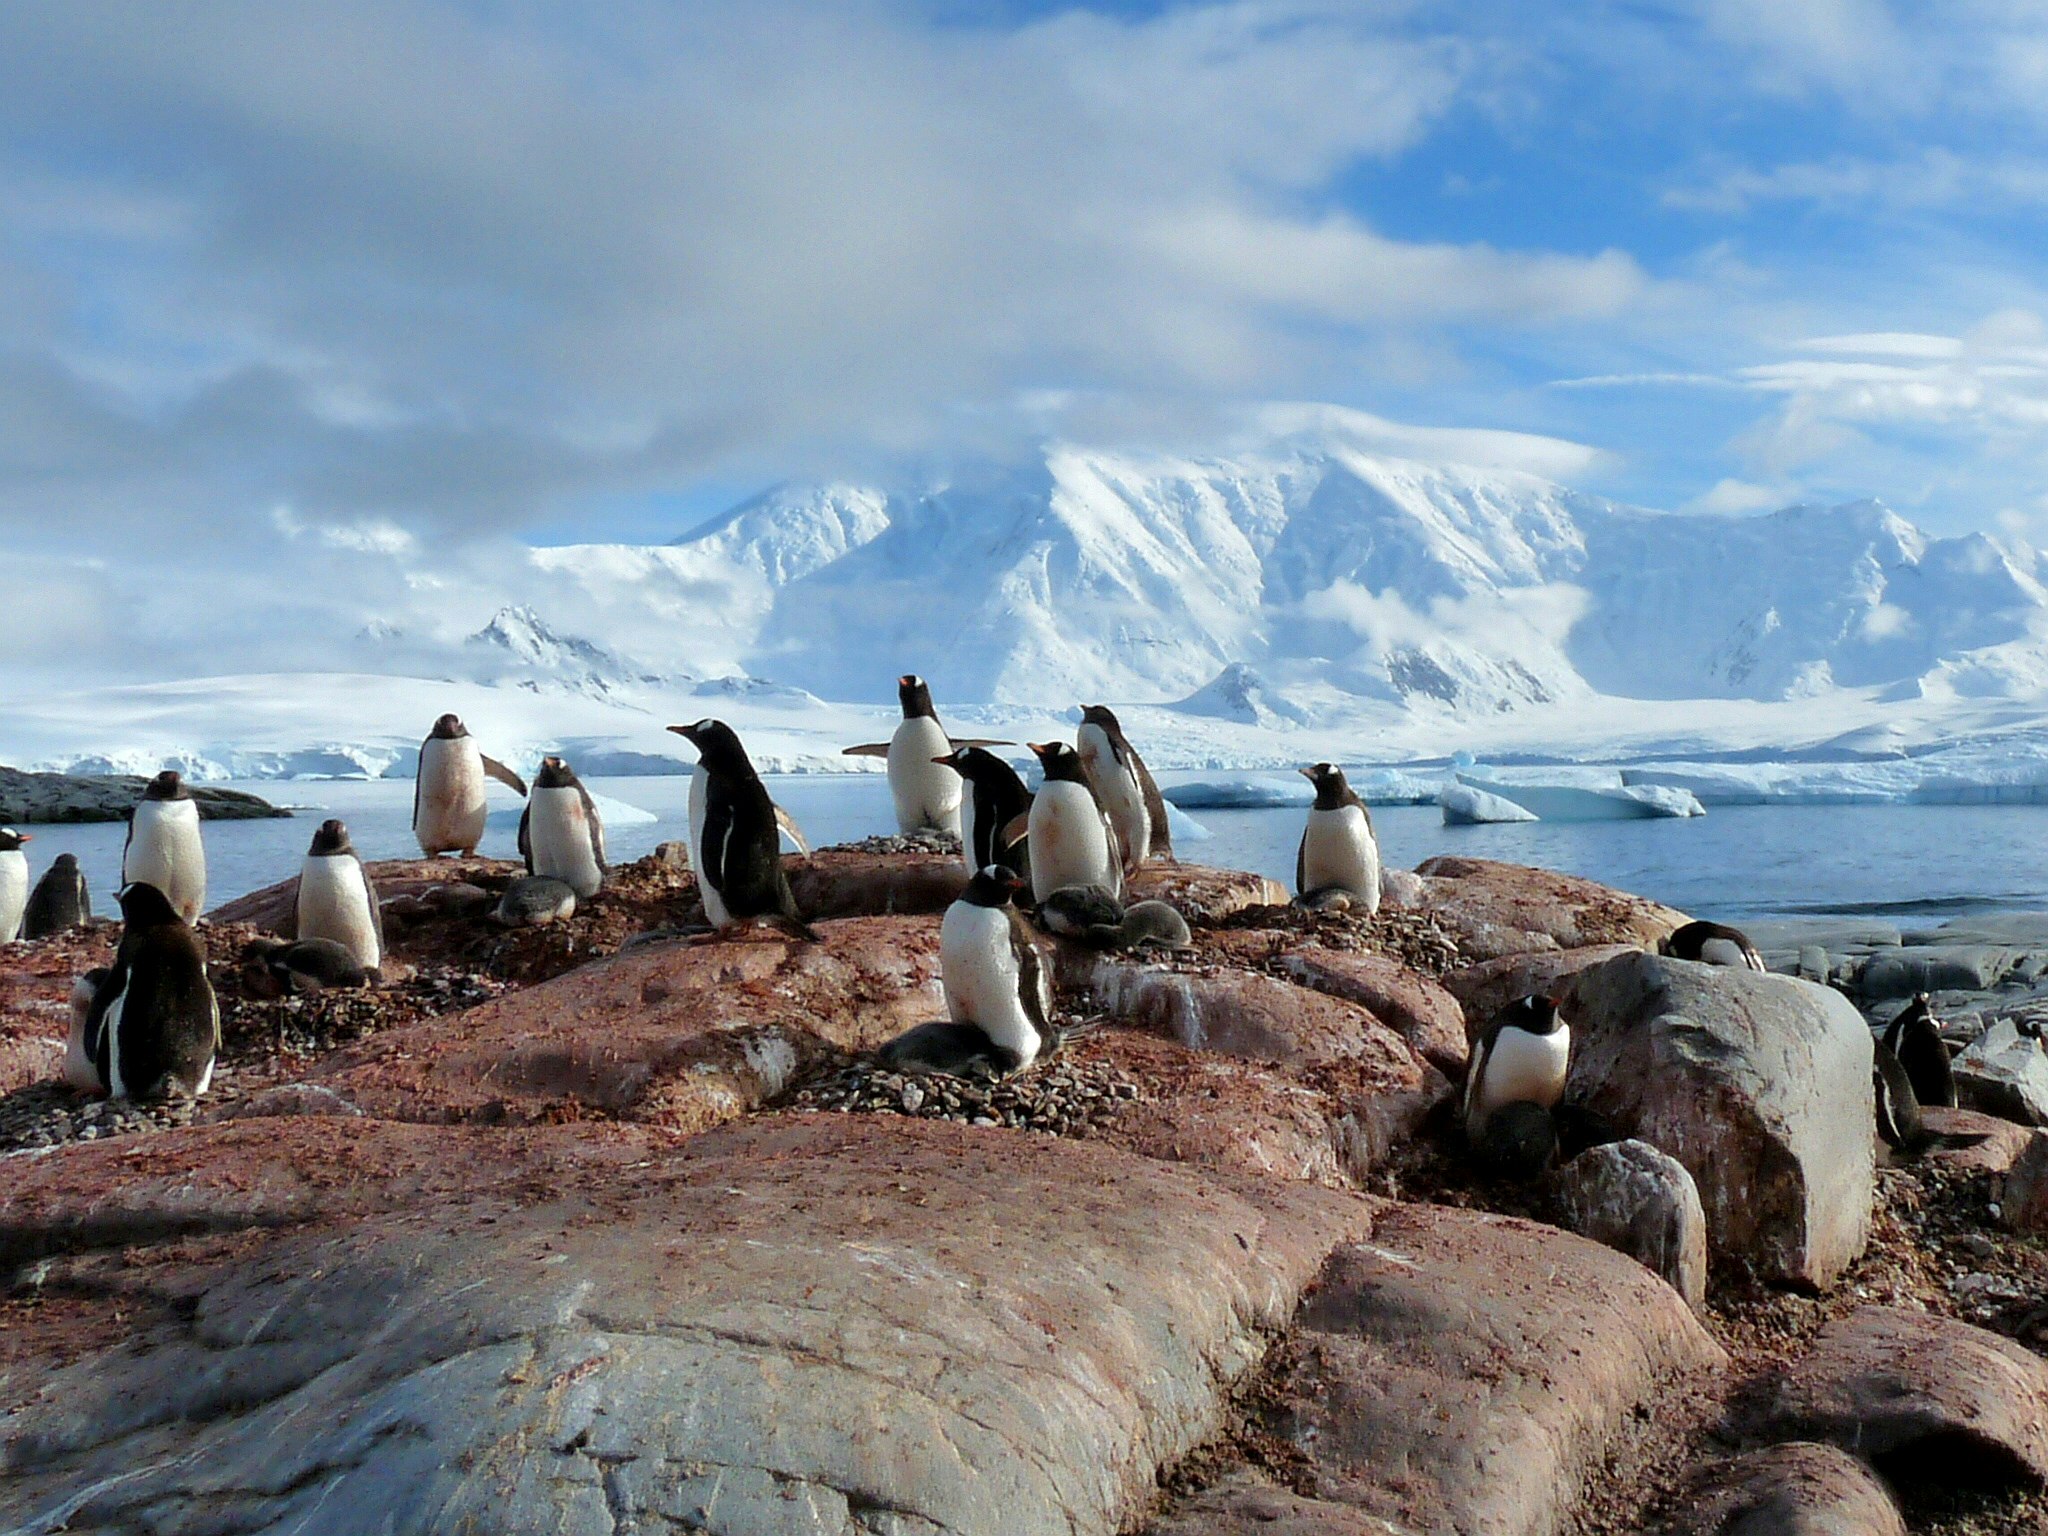 A group of gentoo penguins are sitting on top of a rocky outcrop in Antarctica, with an iceberg littered ocean and enormous snowy mountains beyond.